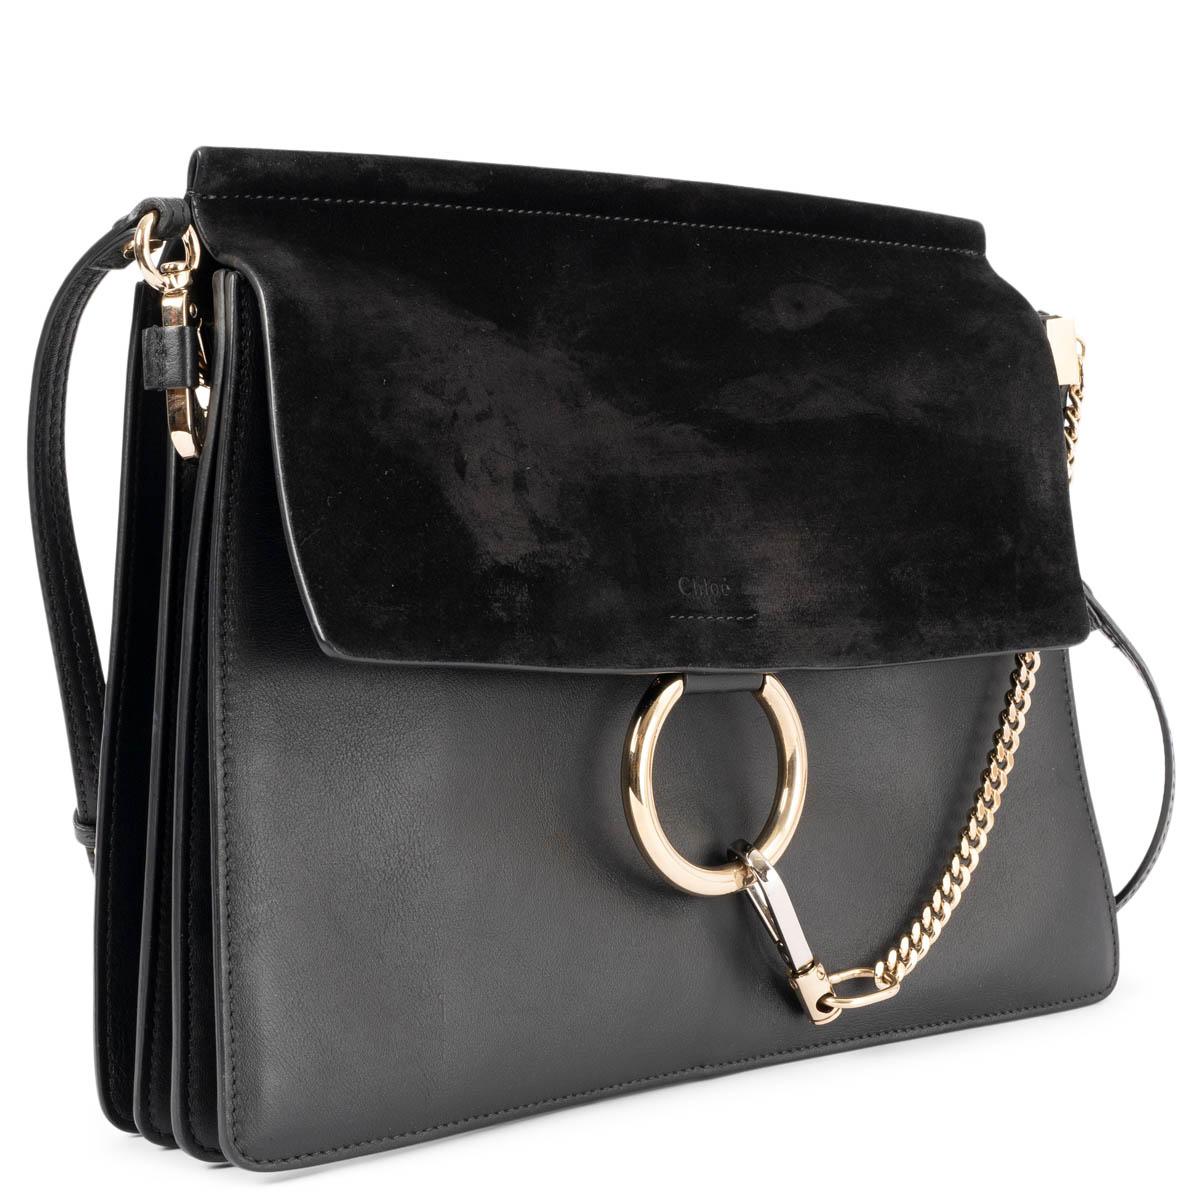 100% authentic Chloé Faye Medium shoulder bag in black suede and calfskin featuring light gold-tone hardware.  Closes with a magnetic-snap under the flap. Open pocket under the flap. Unlined with a zipper pocket against the back. Has been carried